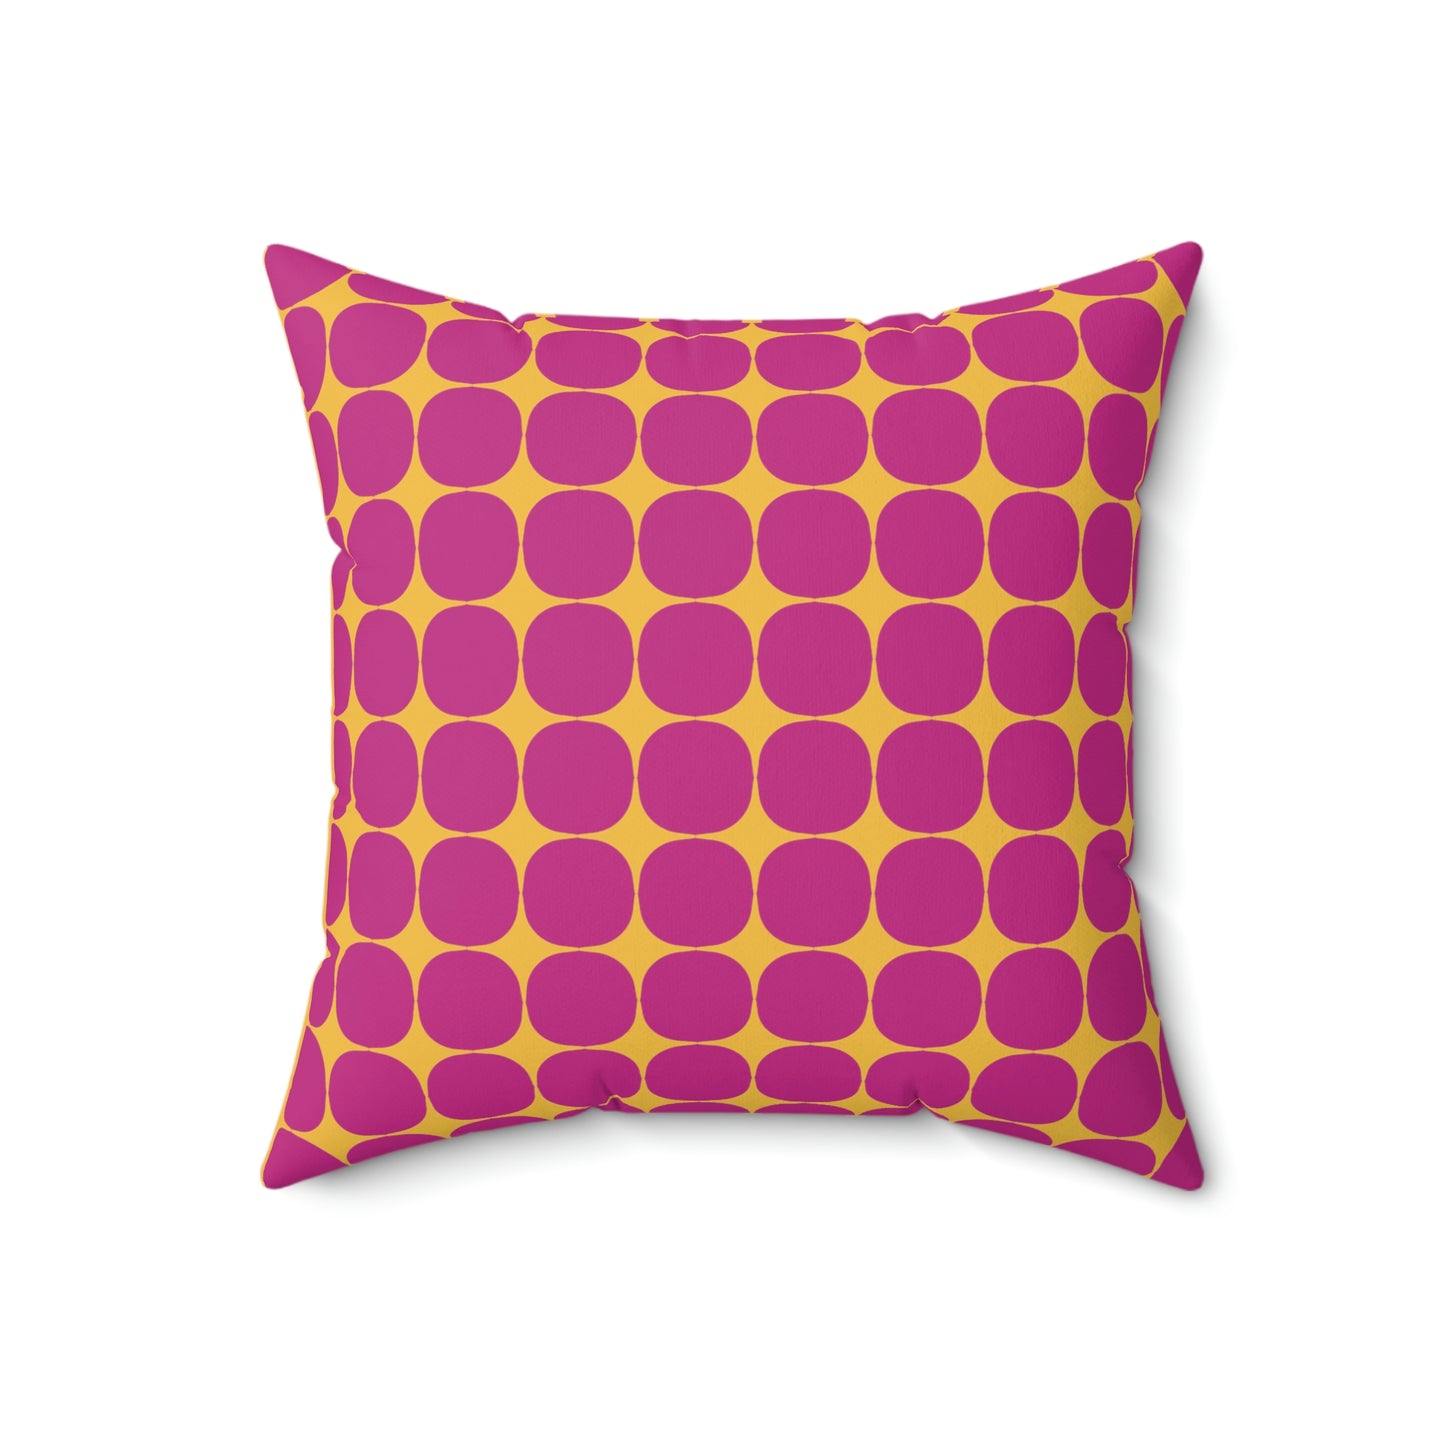 Polyester Square Pillow Case “Rhombus Star on Pink”